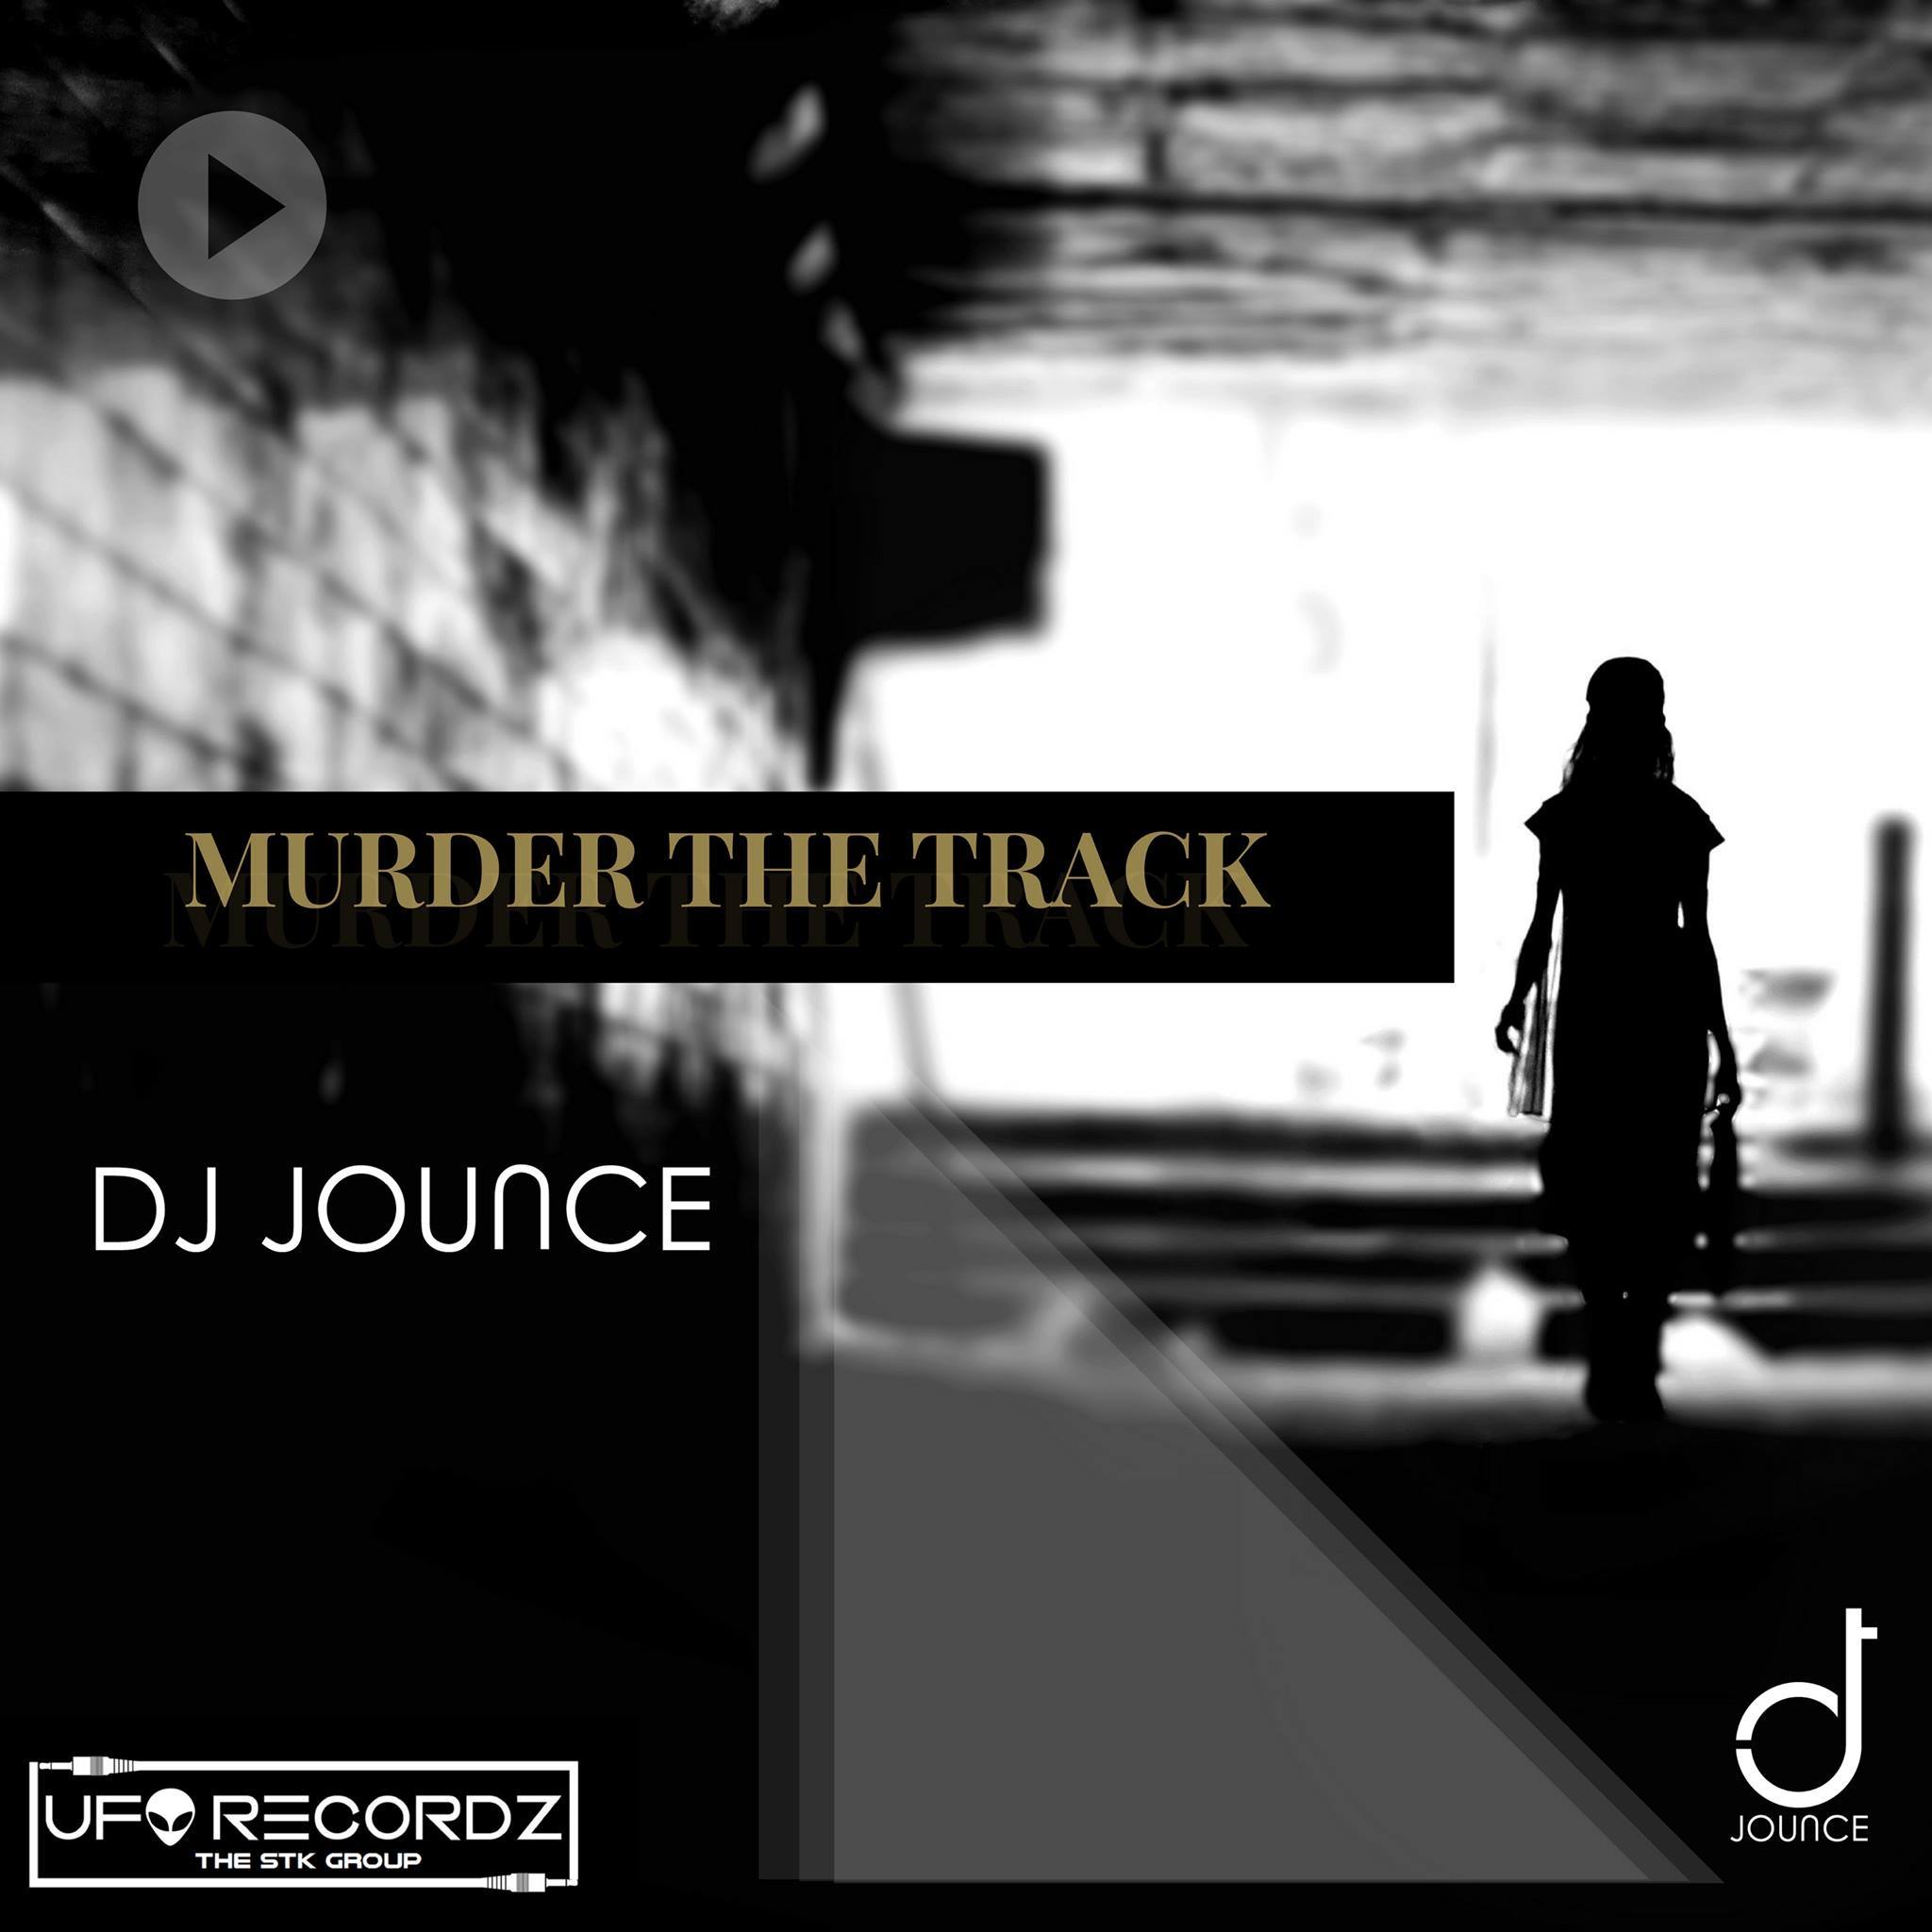 DJ JOUNCE MURDERED THIS TRACK – GRAB IT!